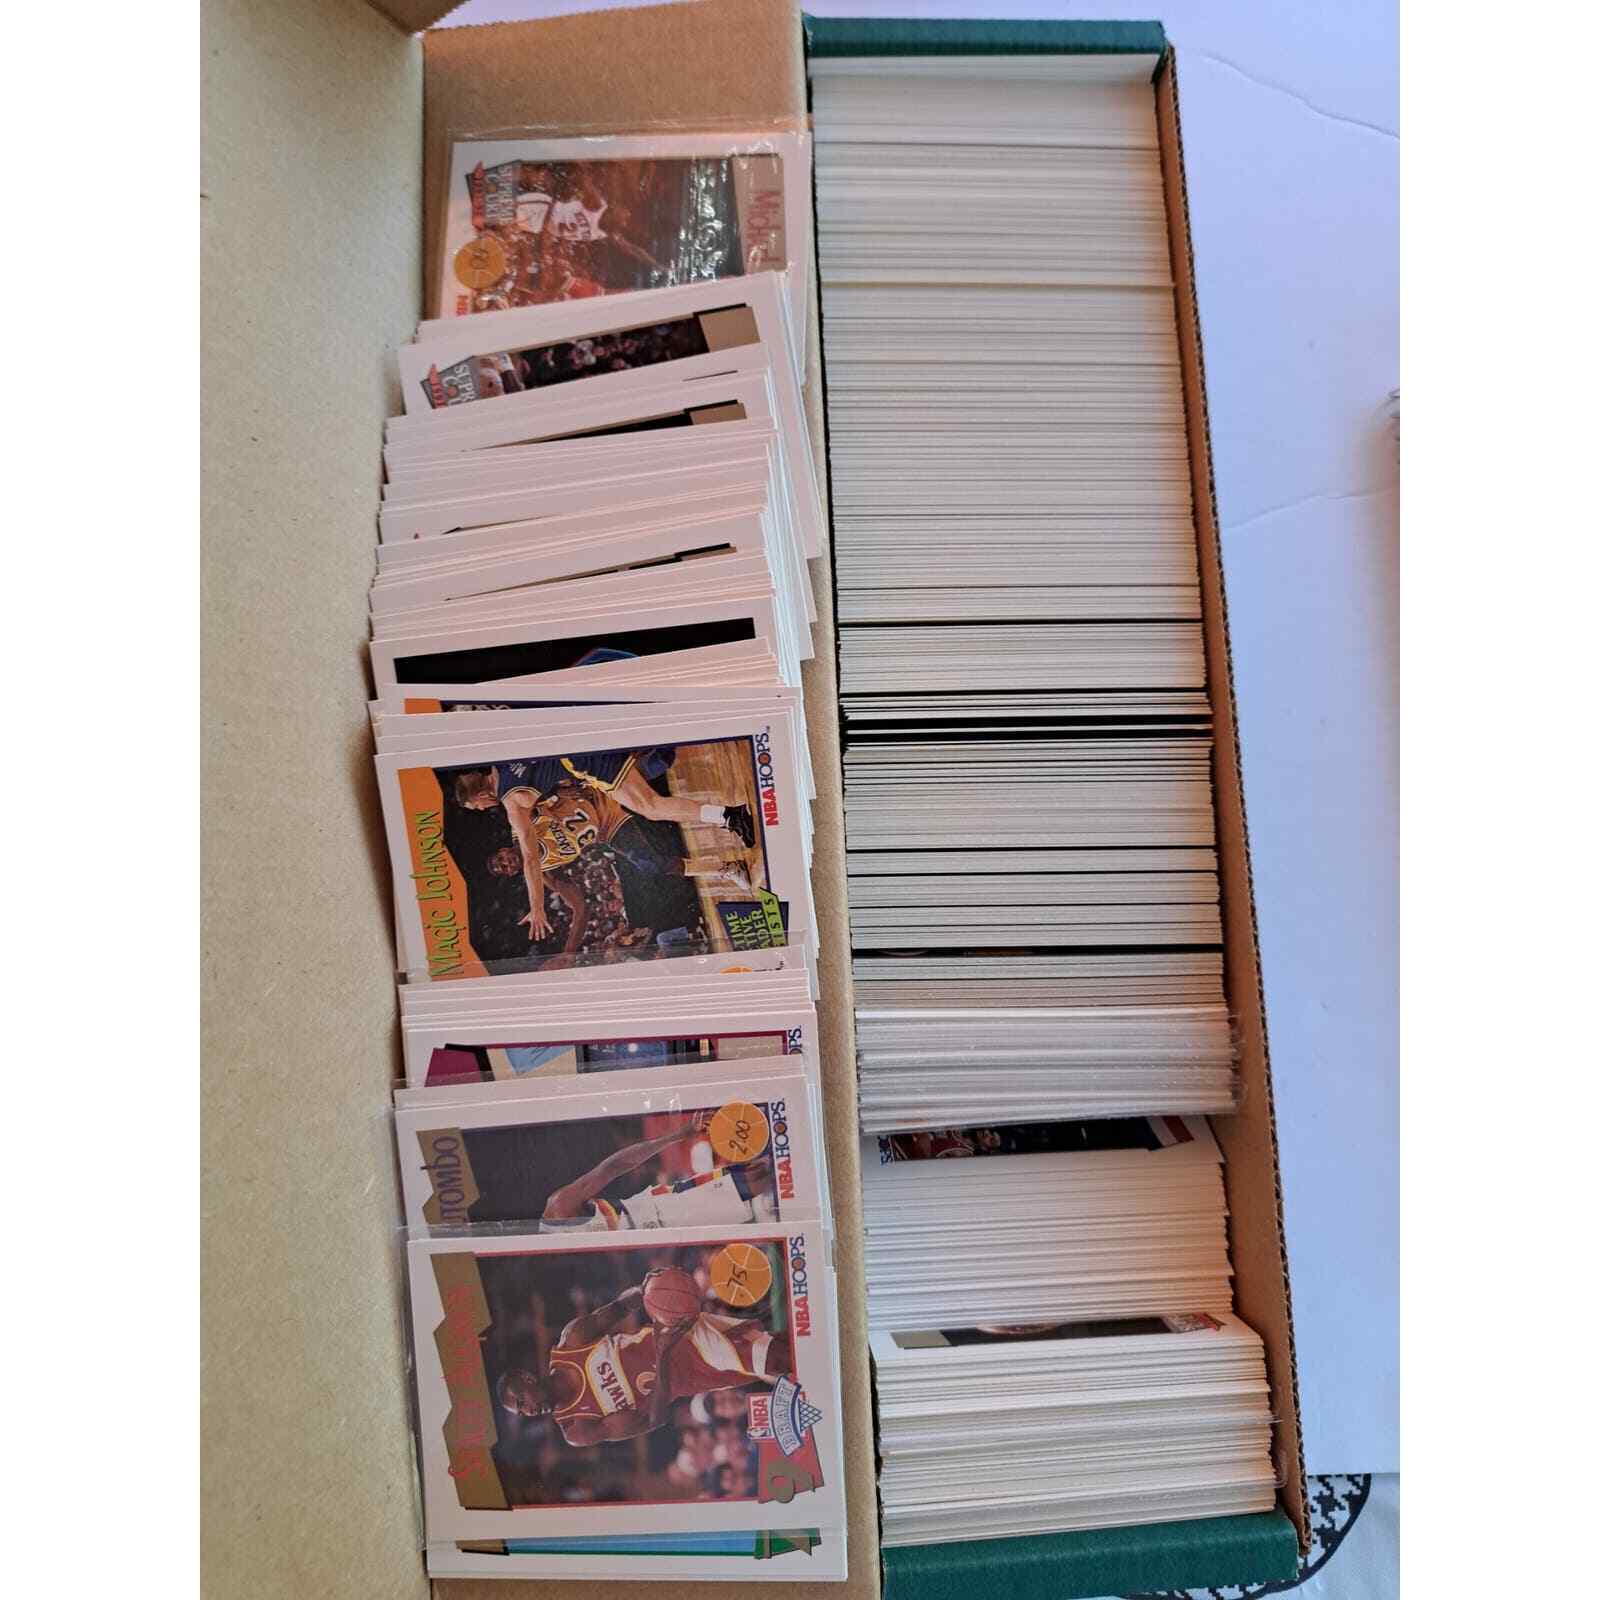 NBA Hoops BasketBall Card Boxed Lot 1990-93 Great Condition